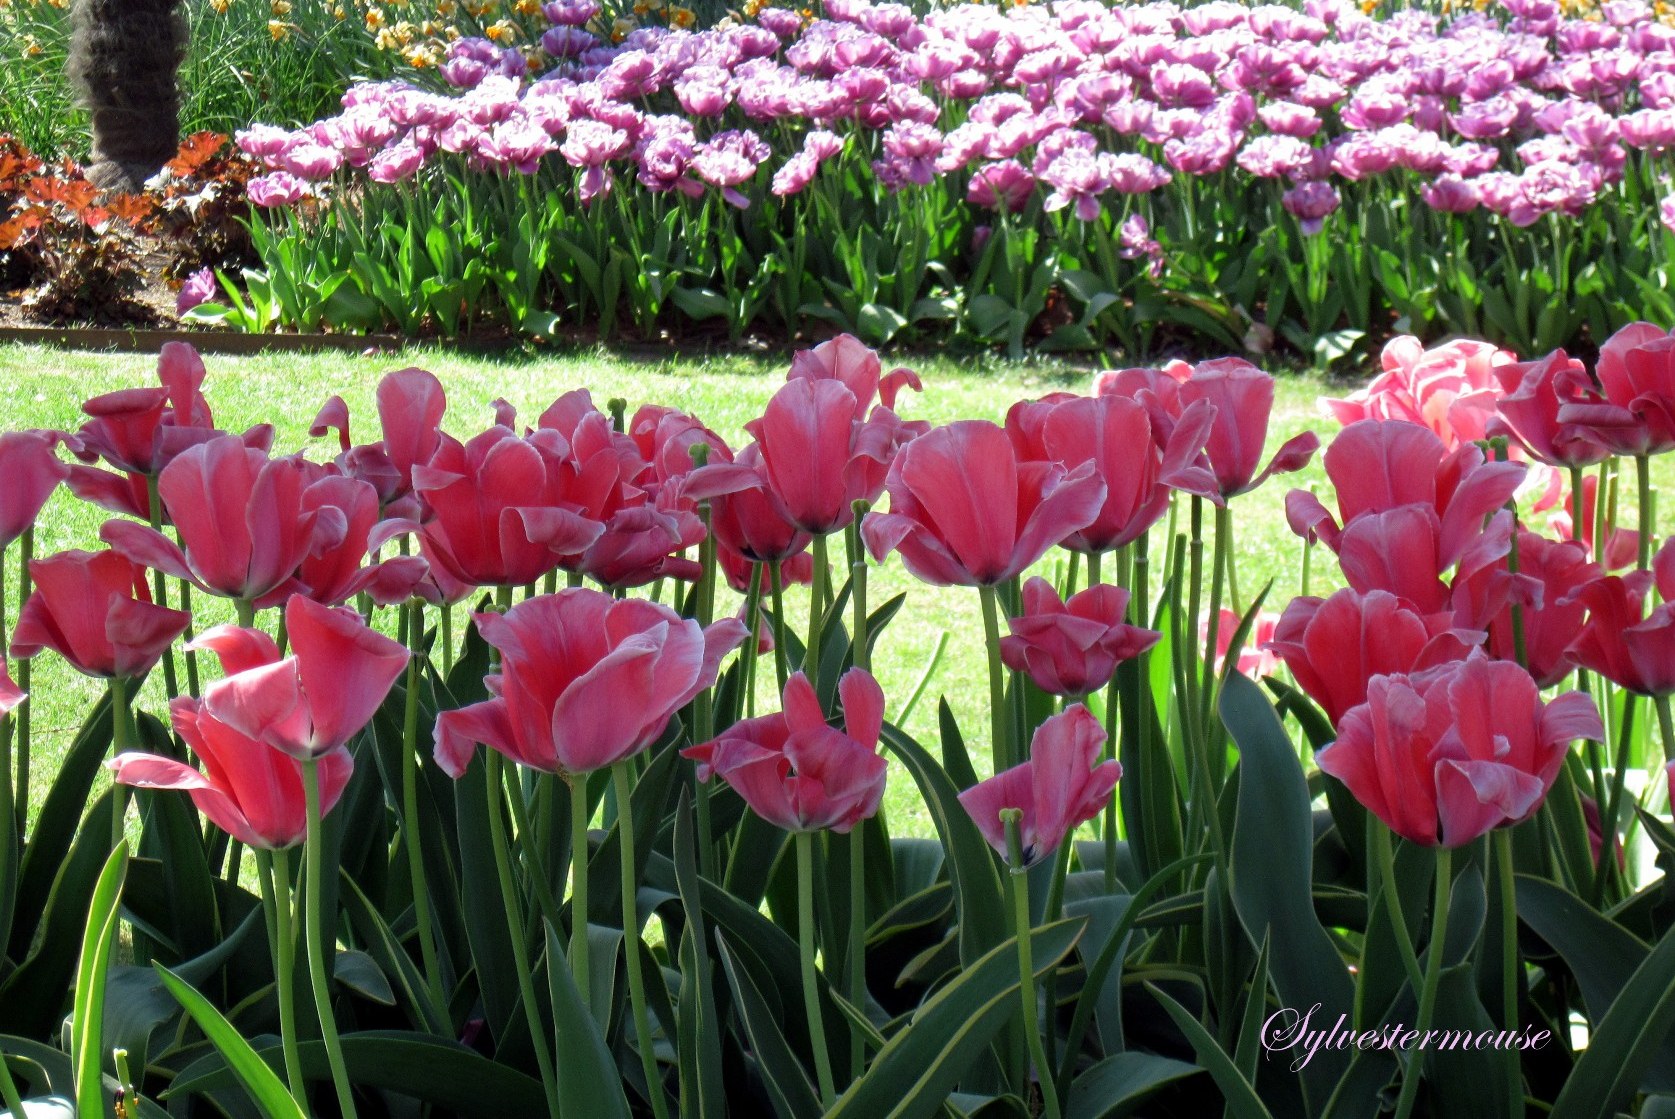 First Kiss of Spring - Tulips photo by Sylvestermouse